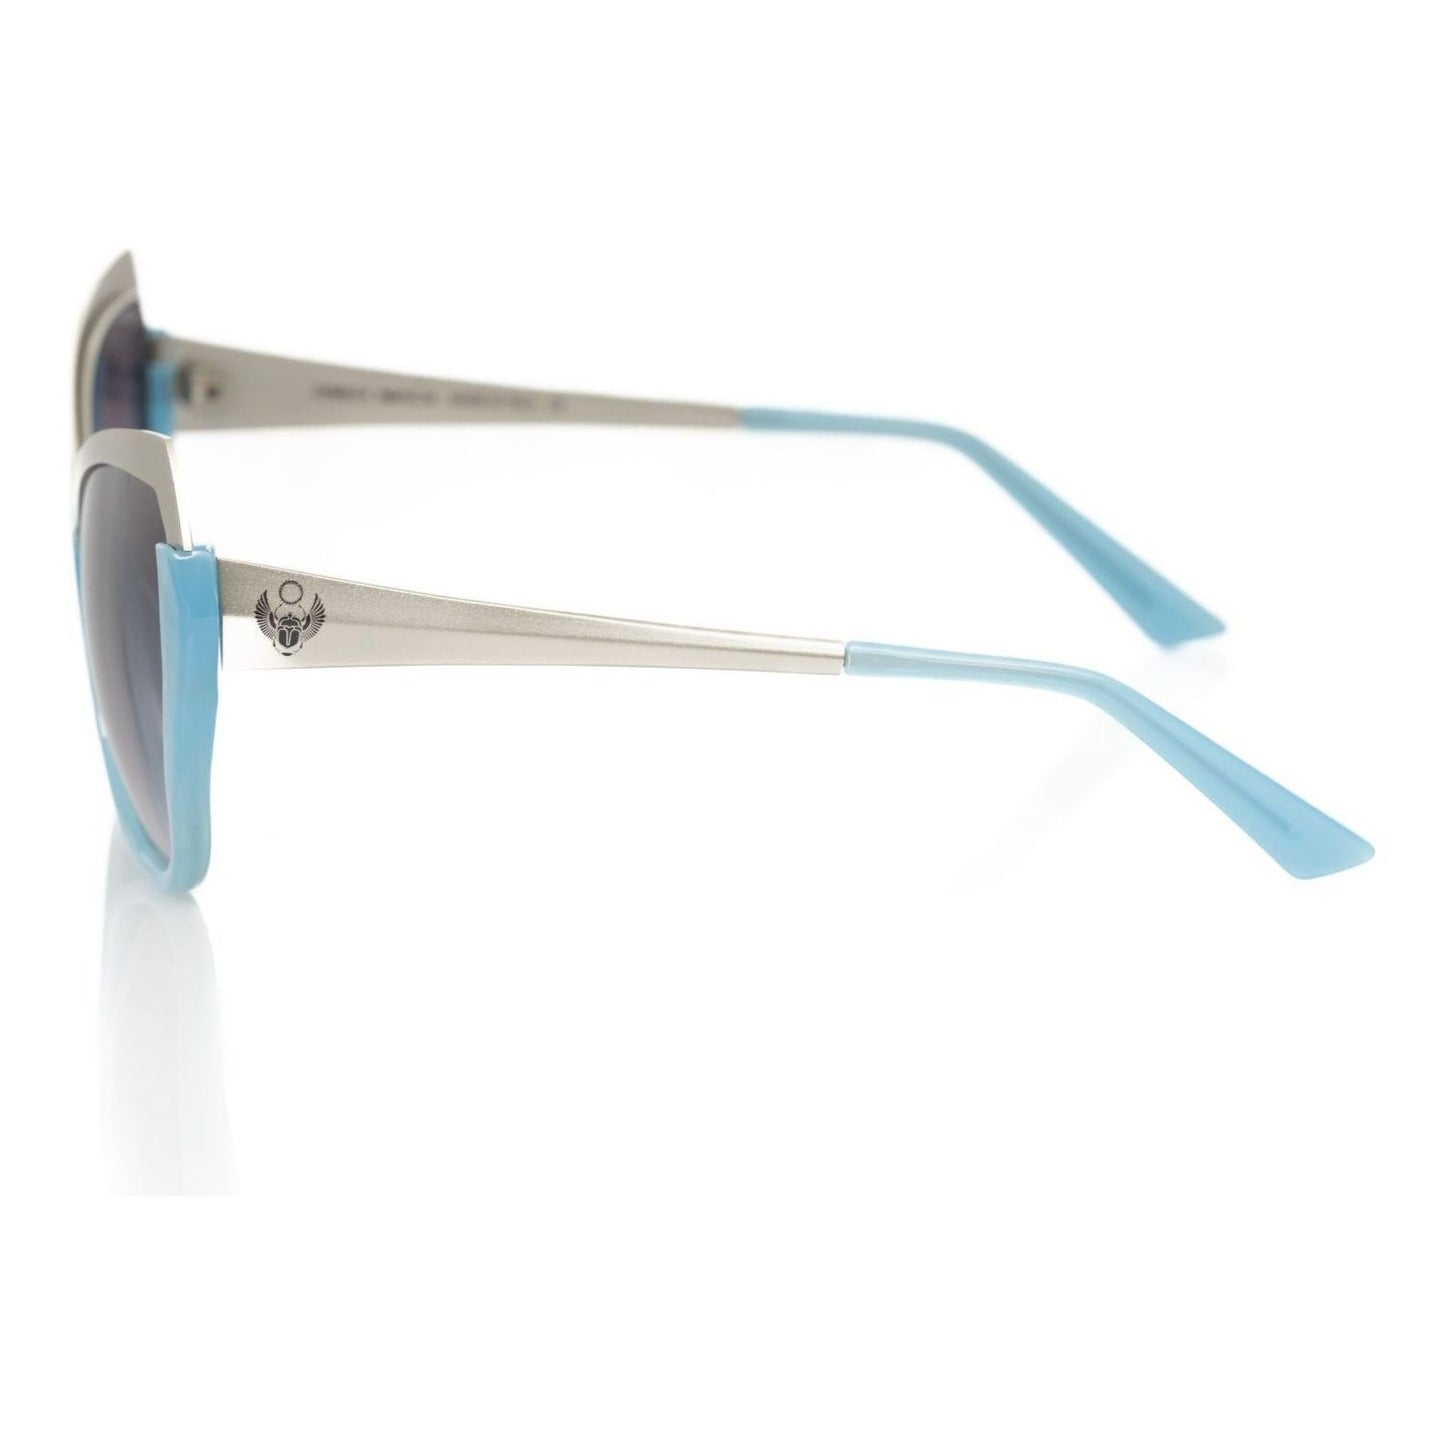 Chic Cat Eye Shades with Metallic Accent Frankie Morello